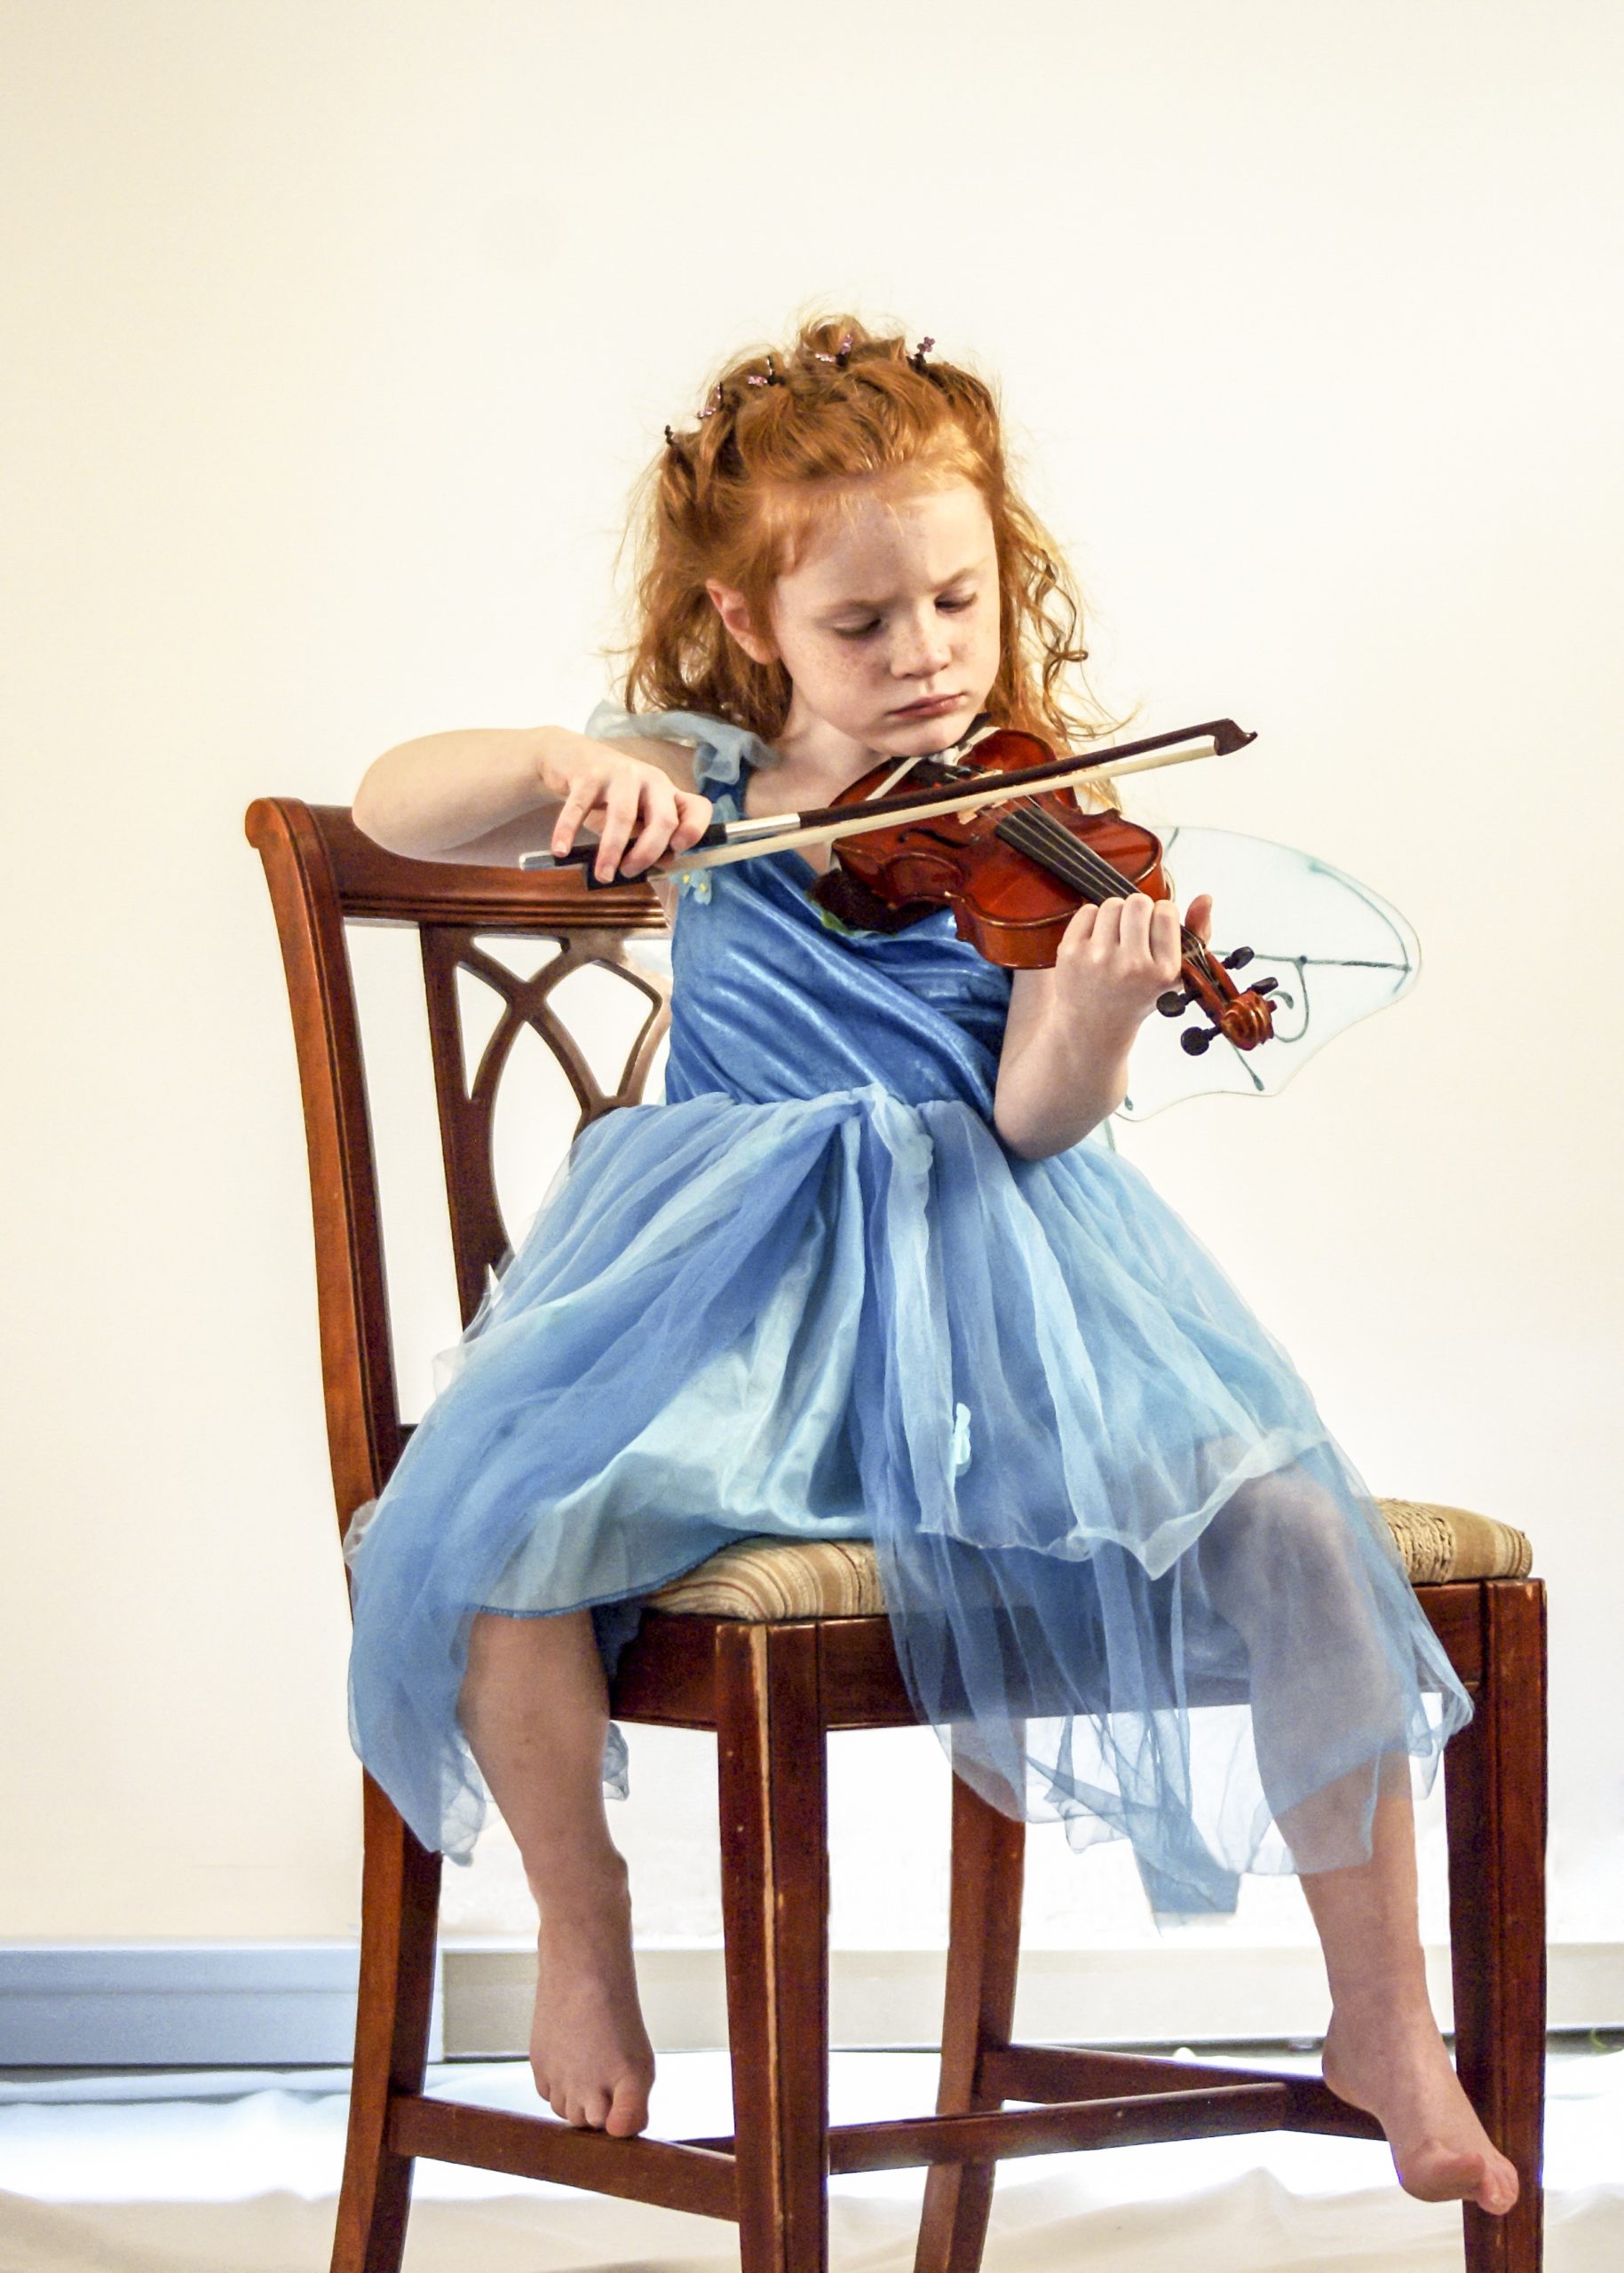 violin lessons cost - group lessons at school